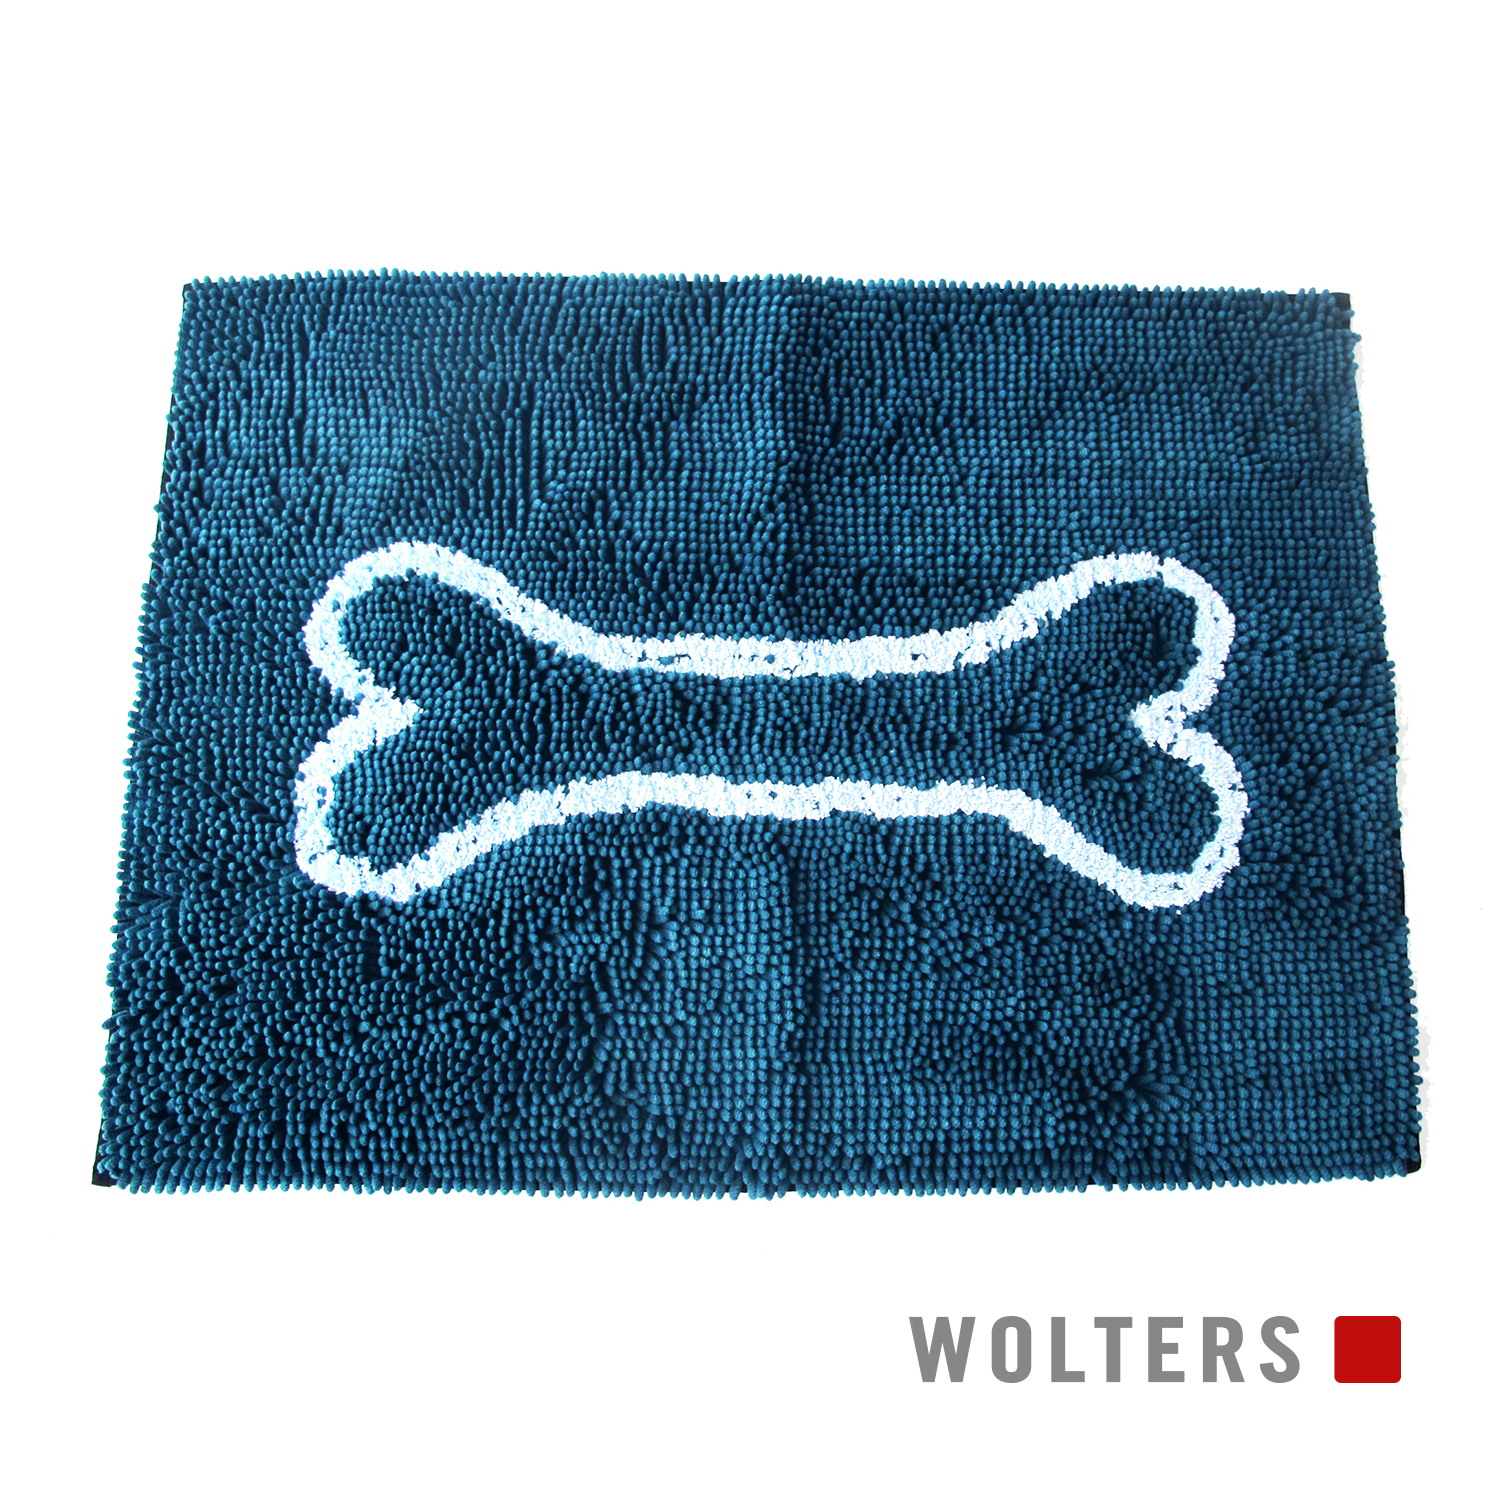 Wolters Dirty Dog Doormat - Special Edition, petrol/türkis